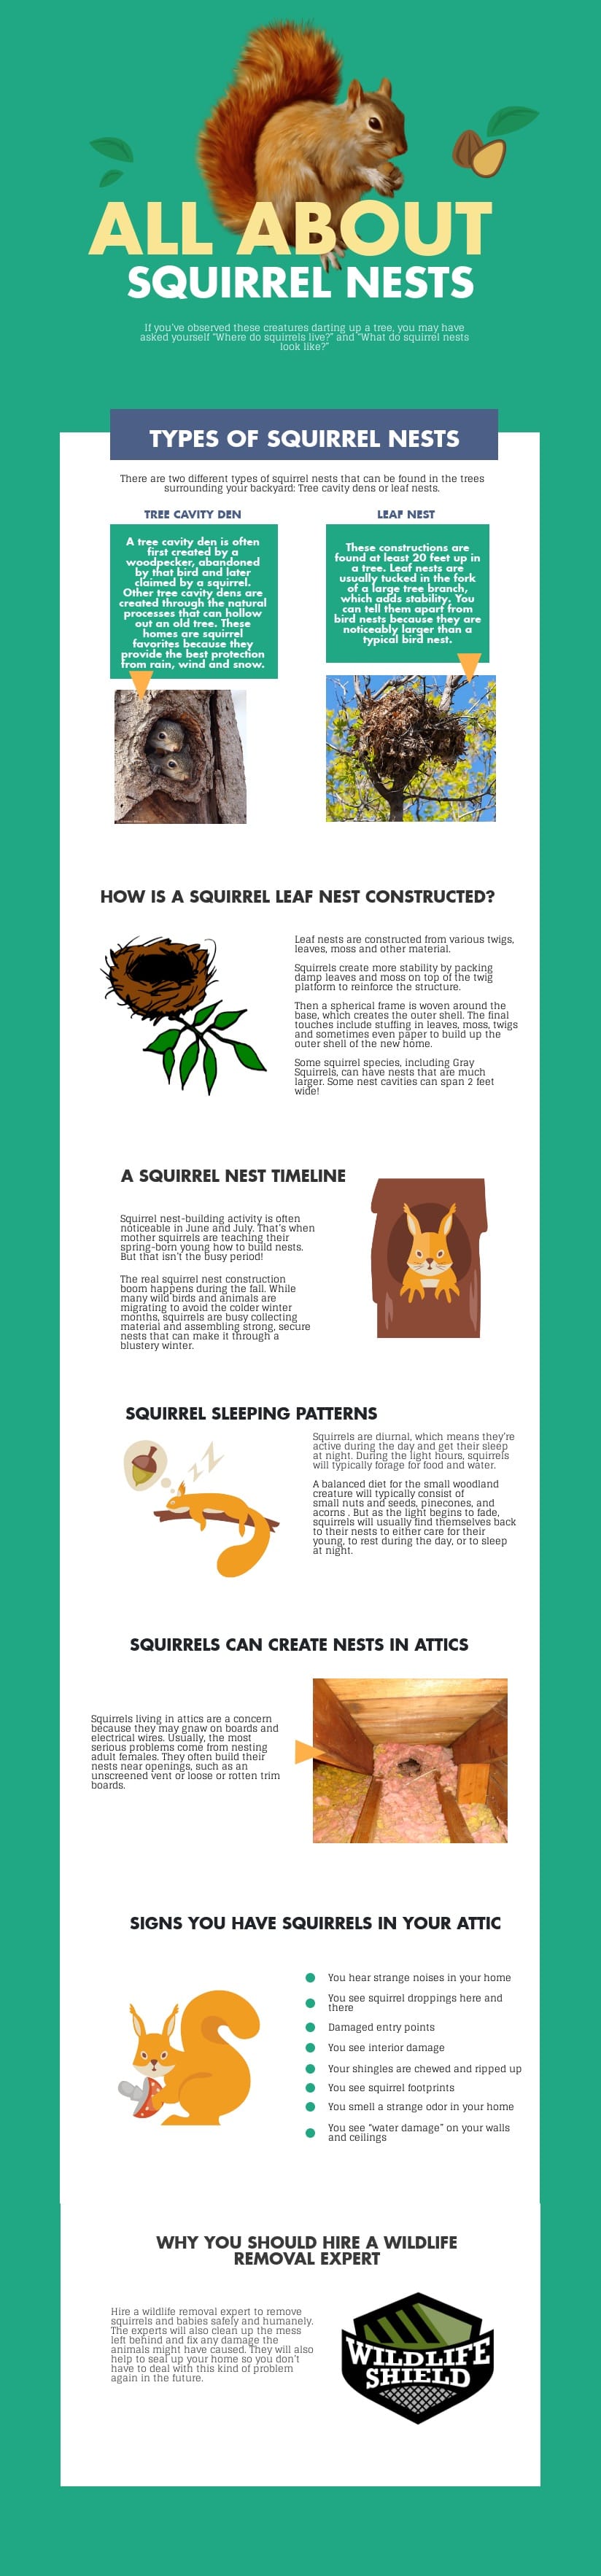 all about squirrel nests - infographic